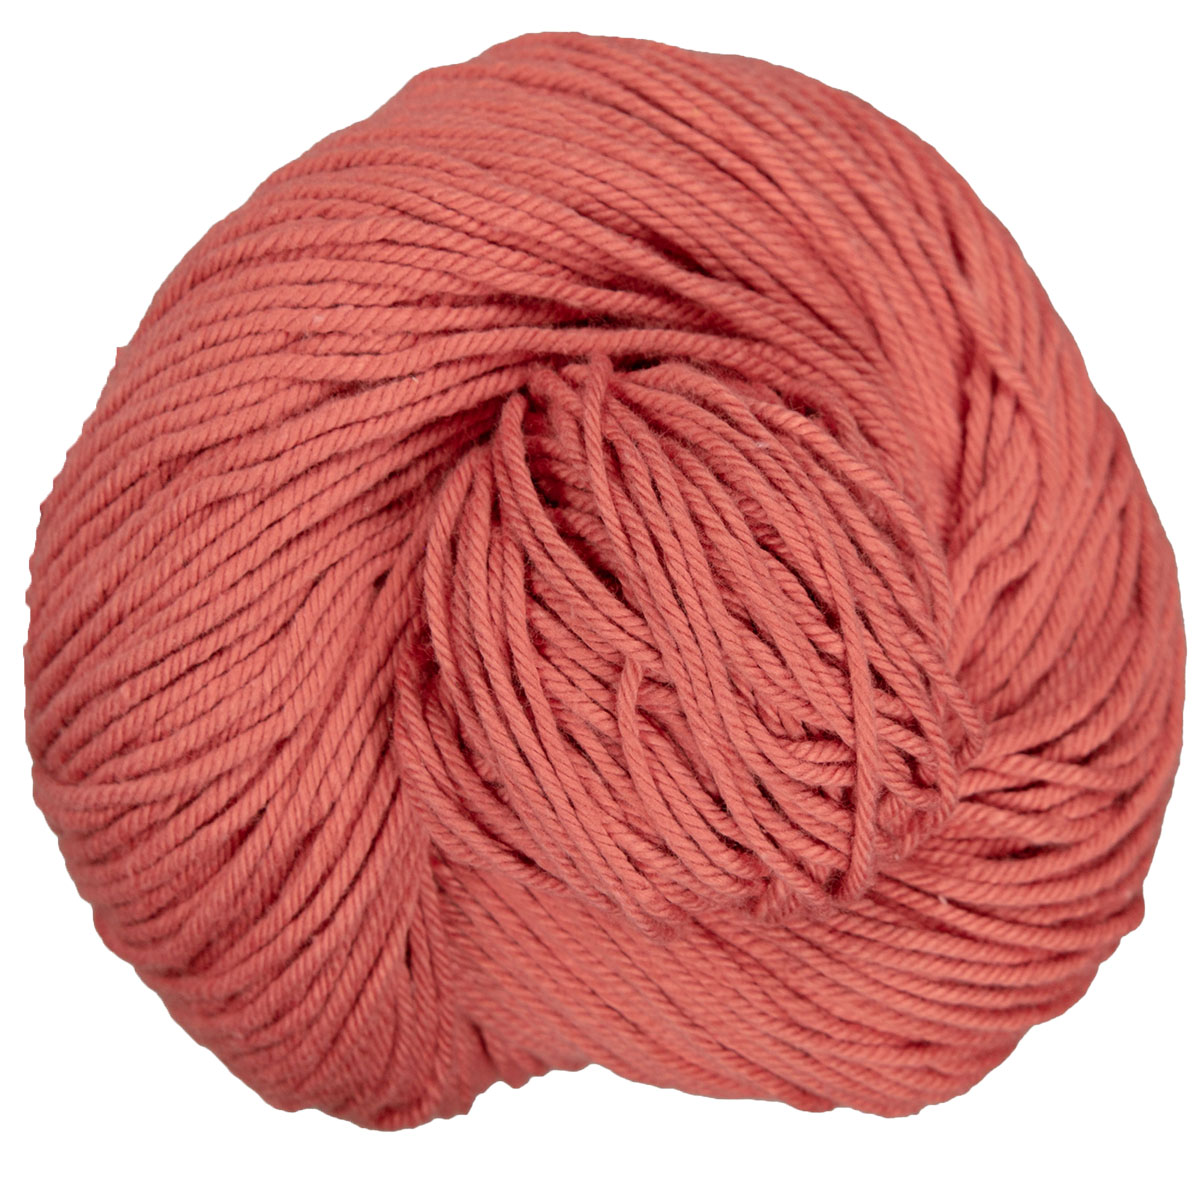 Cascade Nifty Cotton Yarn - 55 Cranberry at Jimmy Beans Wool